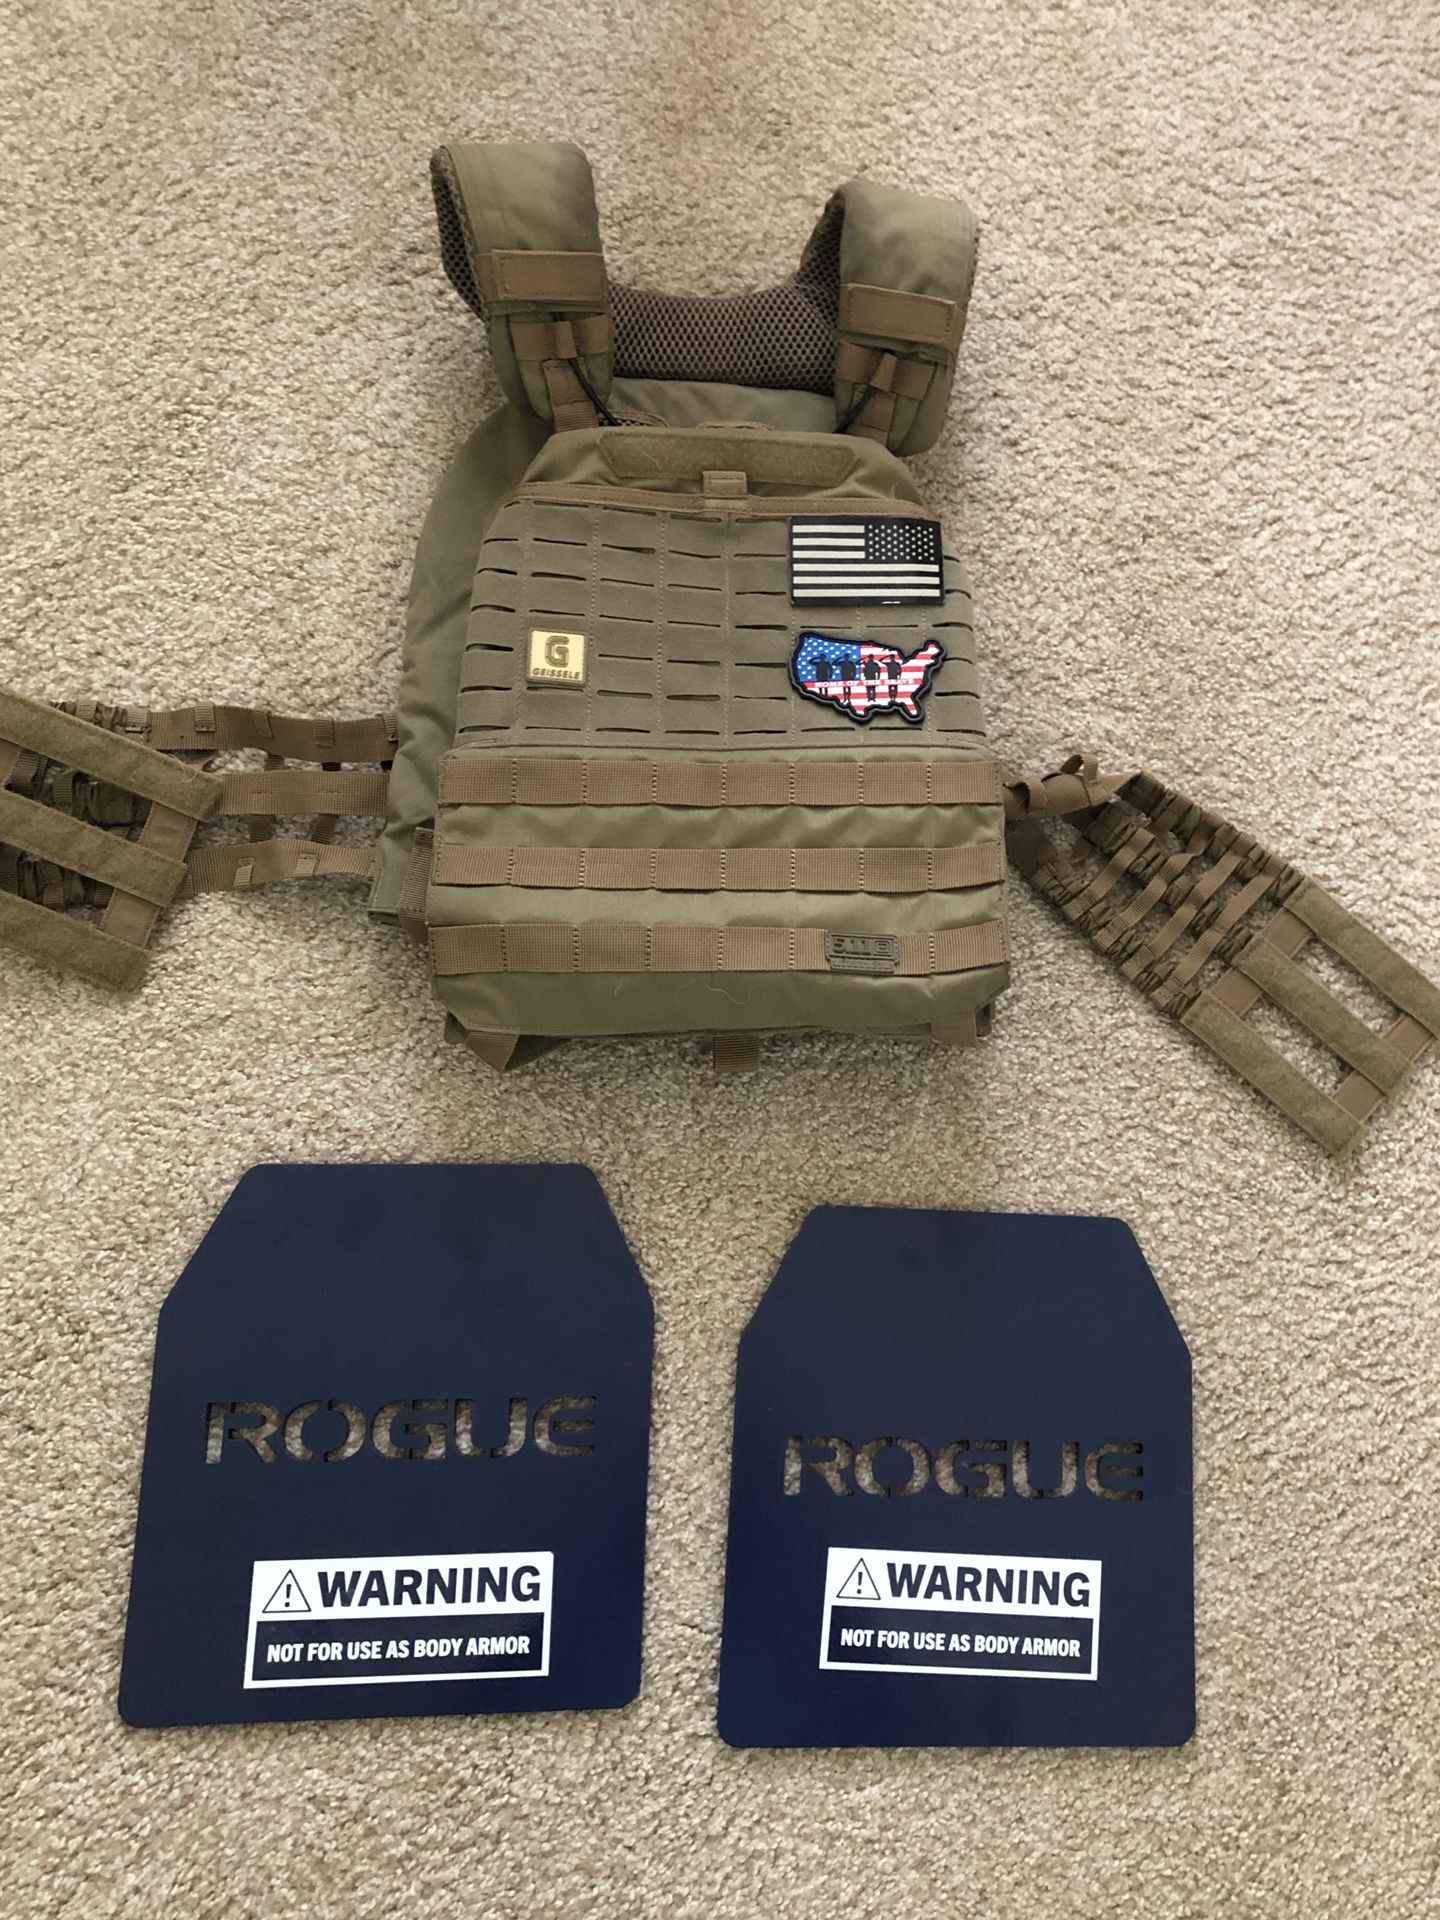 Weight Vest-TACTEC PLATE CARRIER w/ Rogue Fitness 20 lbs Plates ($180)